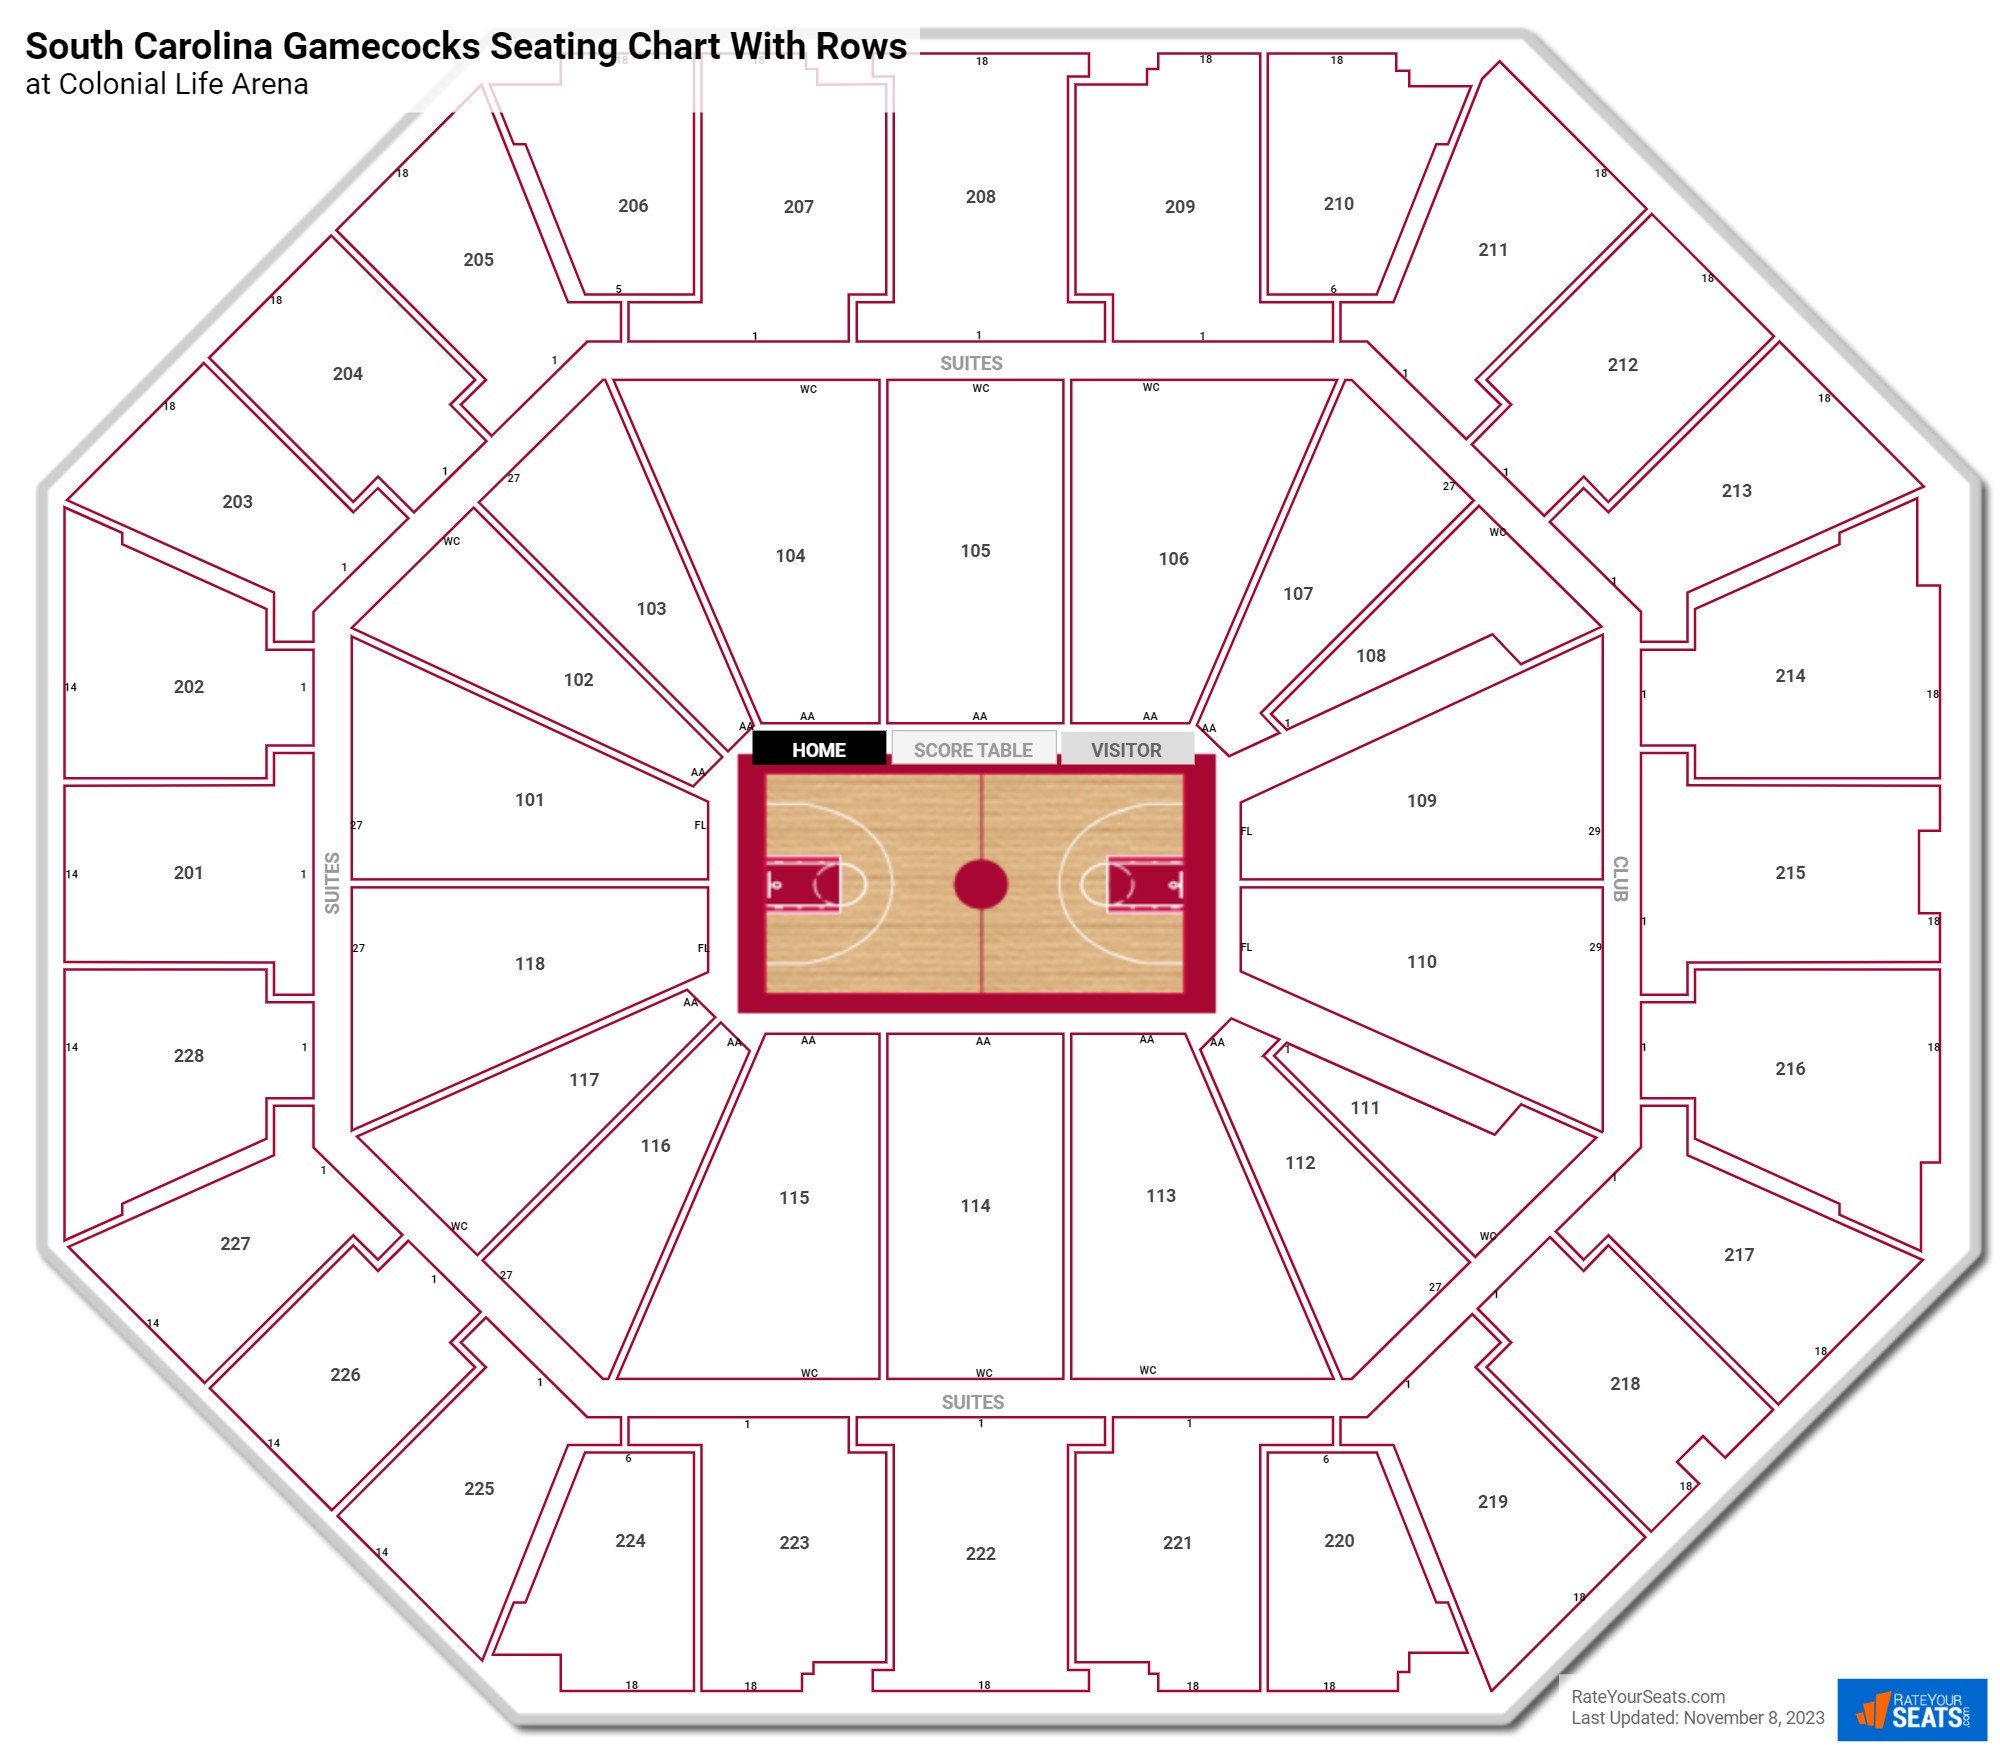 Colonial Life Arena seating chart with row numbers